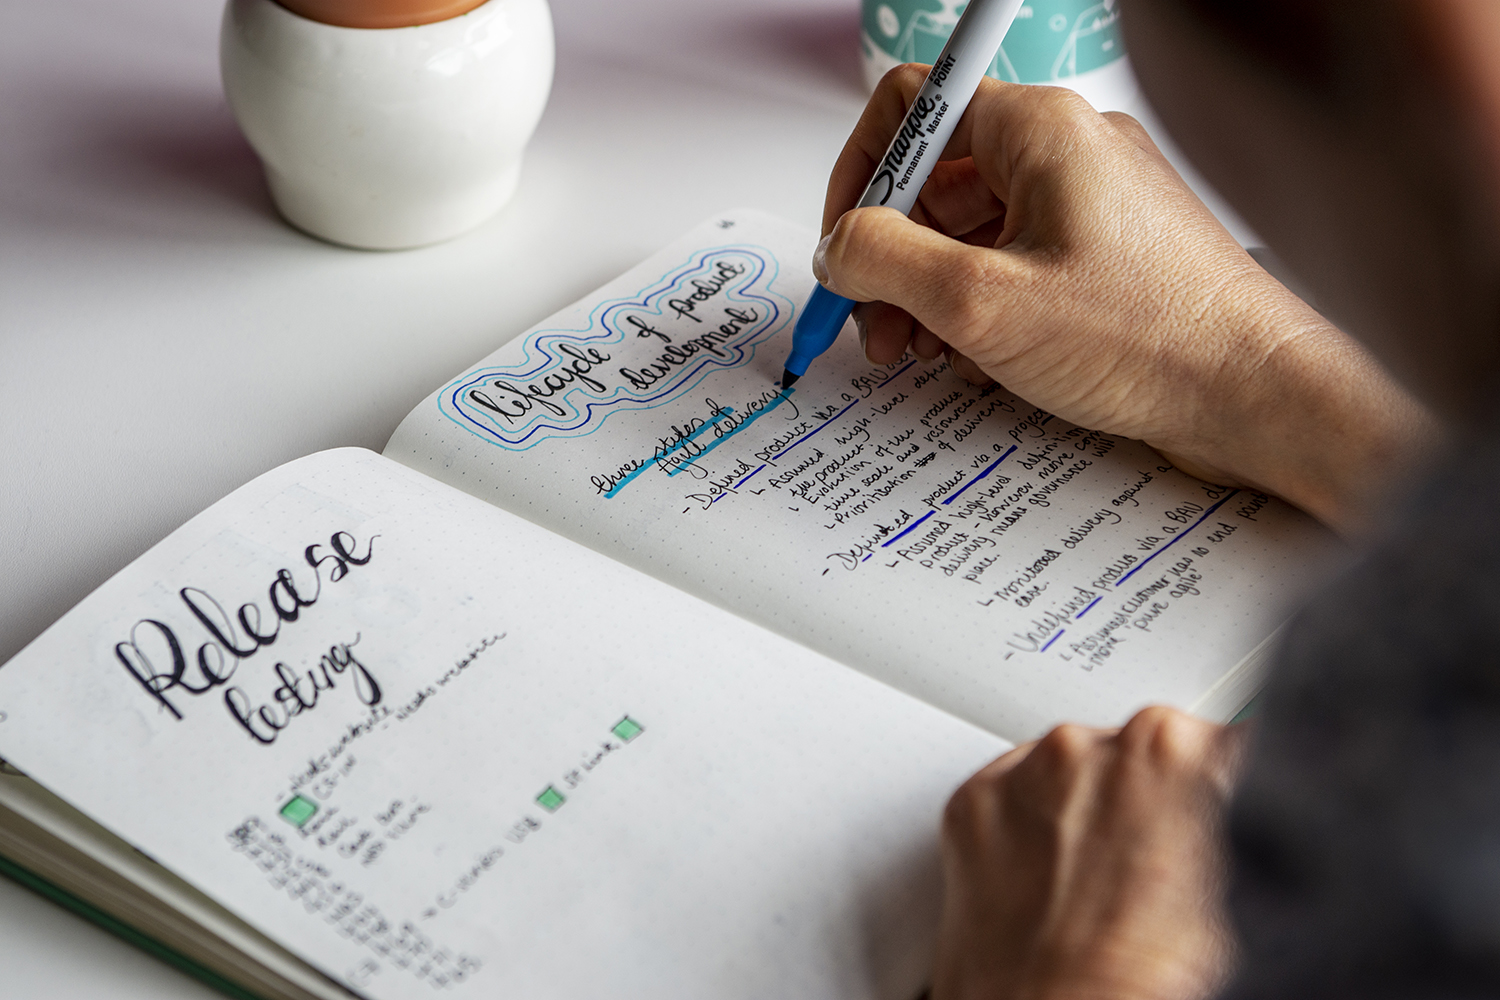 Someone writes into a bullet journal, making notes on product lifecyle.